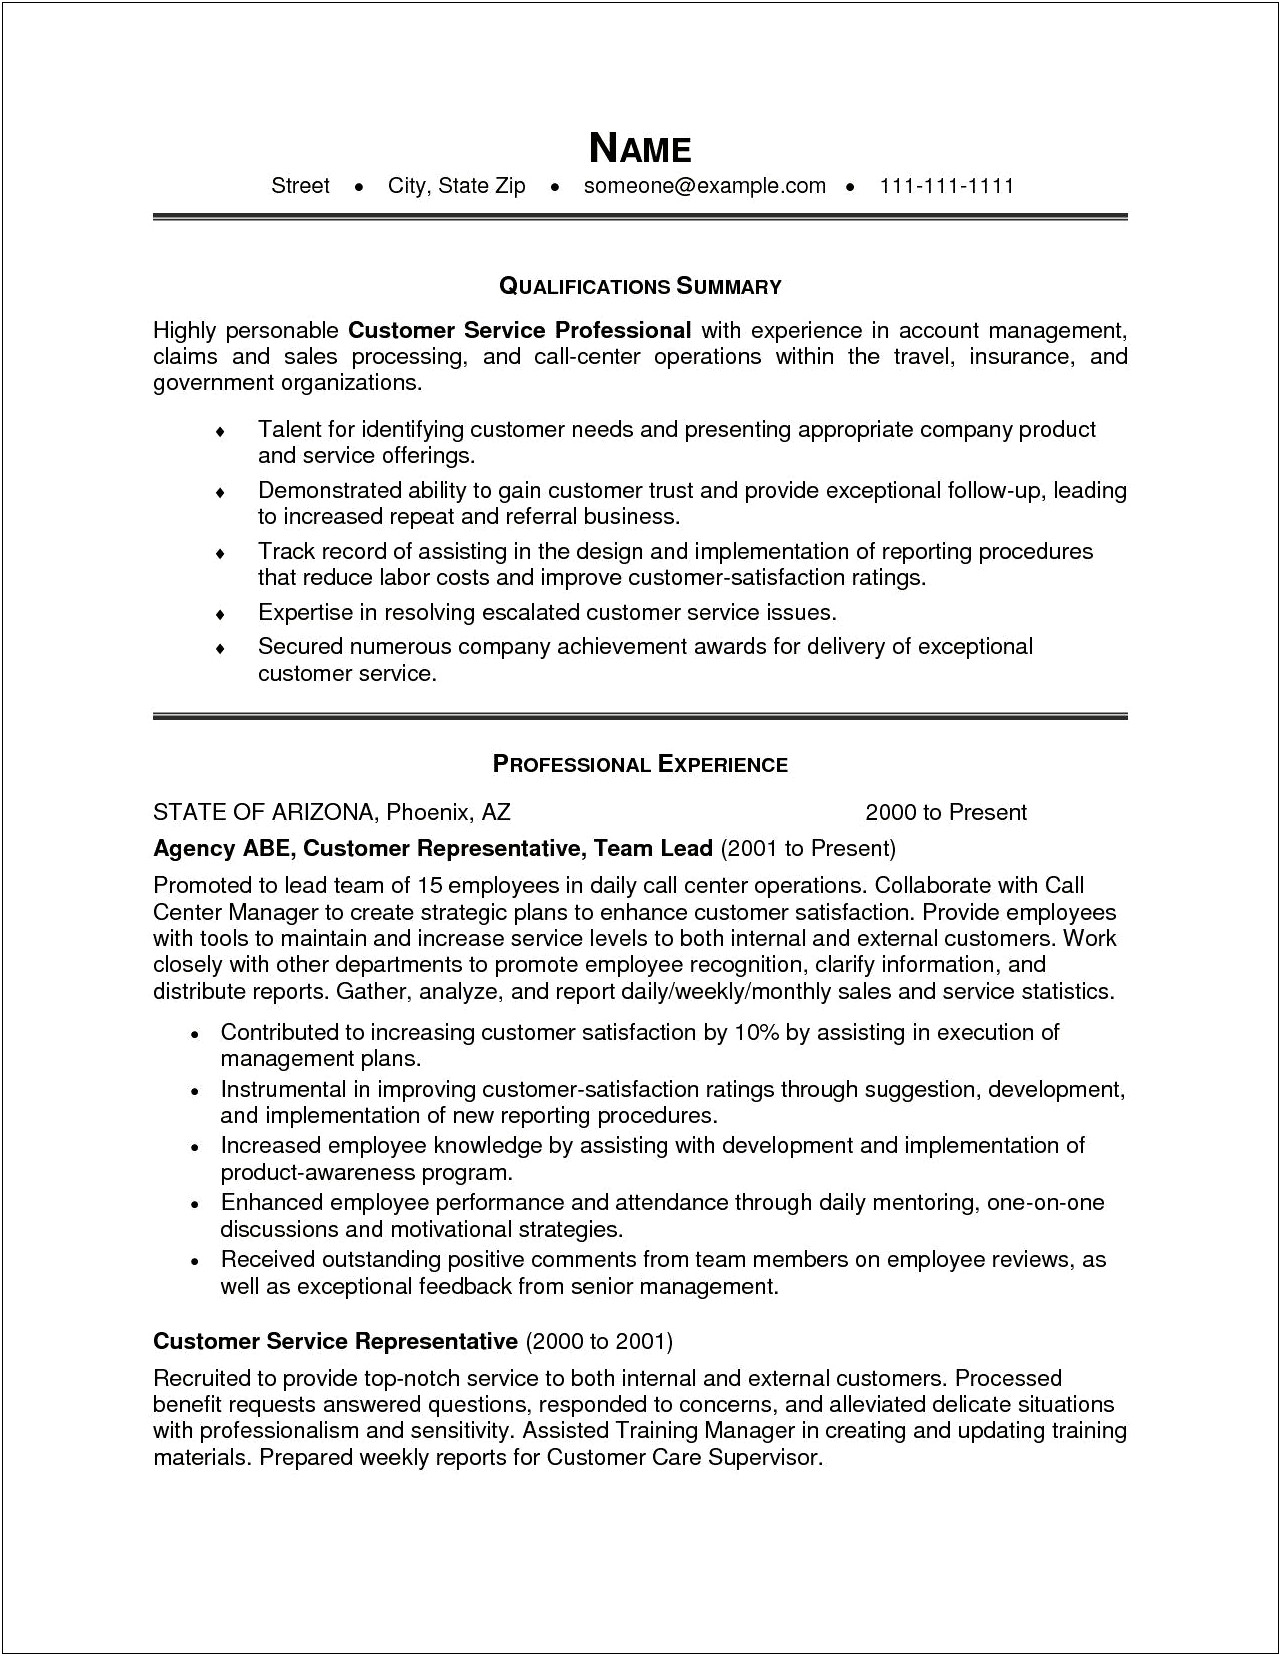 Resume Summary Statement Examples Care